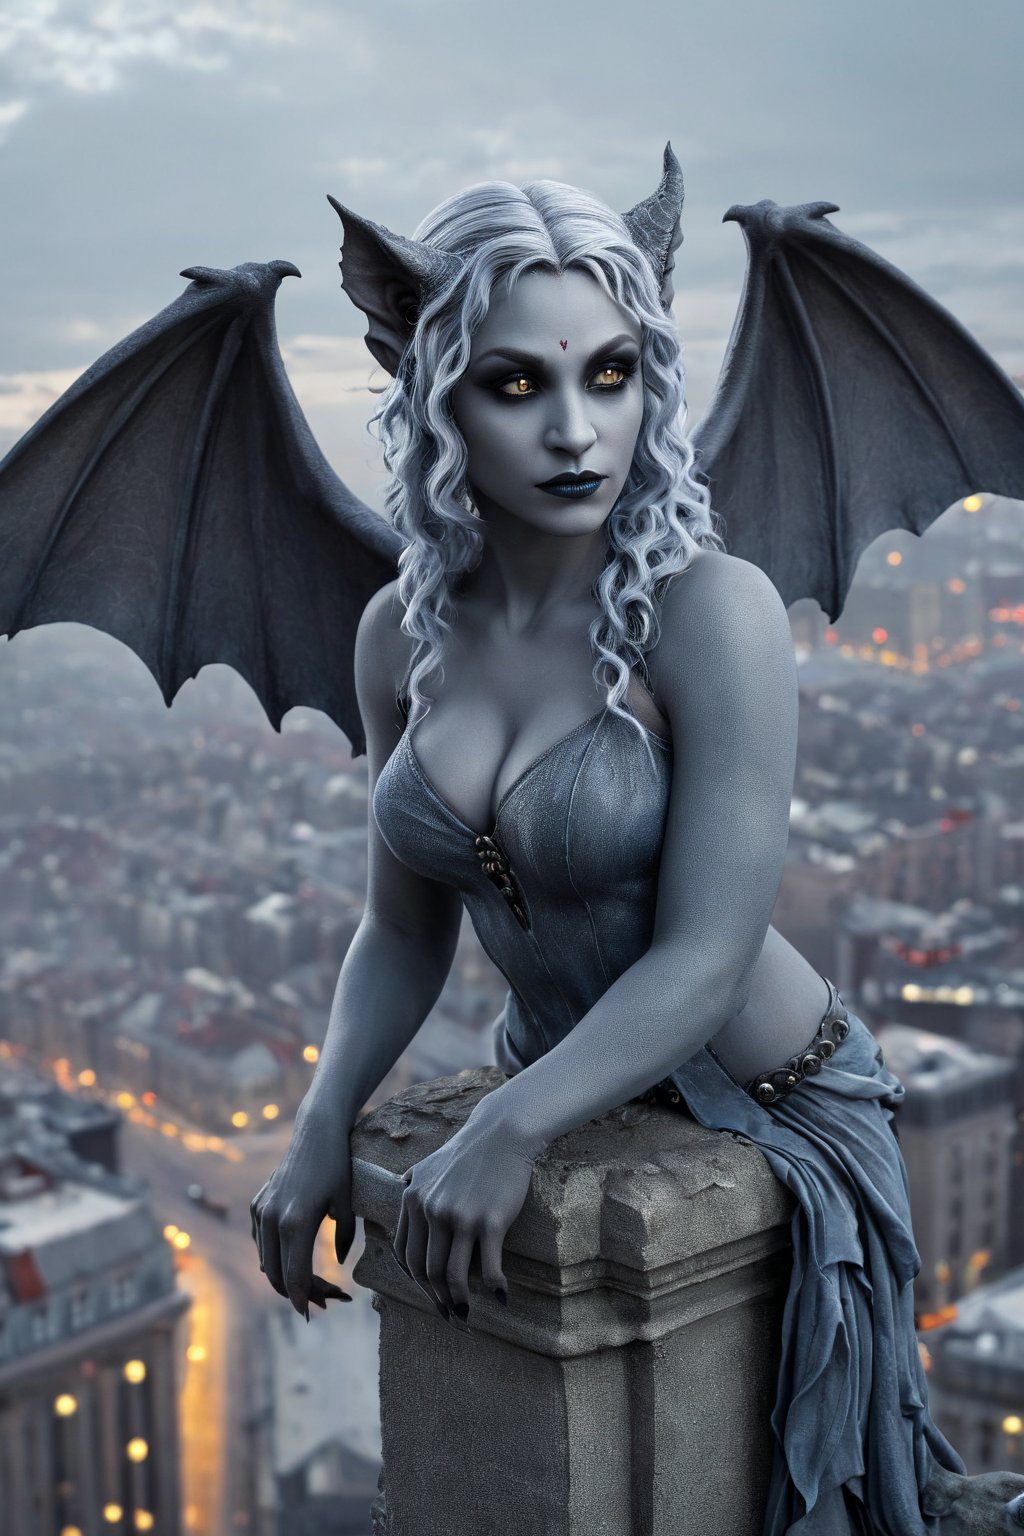 Highly detailed Captivating Gothic fantasy art masterpiece featuring an extremely beautiful gray skin female gargoyle with curly bluish hair standing high above the city leaning forward to watch the people down below. Style of artist Anne Stokes, this dramatic and beautiful portrait transcends into the realms of dark fantasy with intricate details., photo, 3d render, cinematic